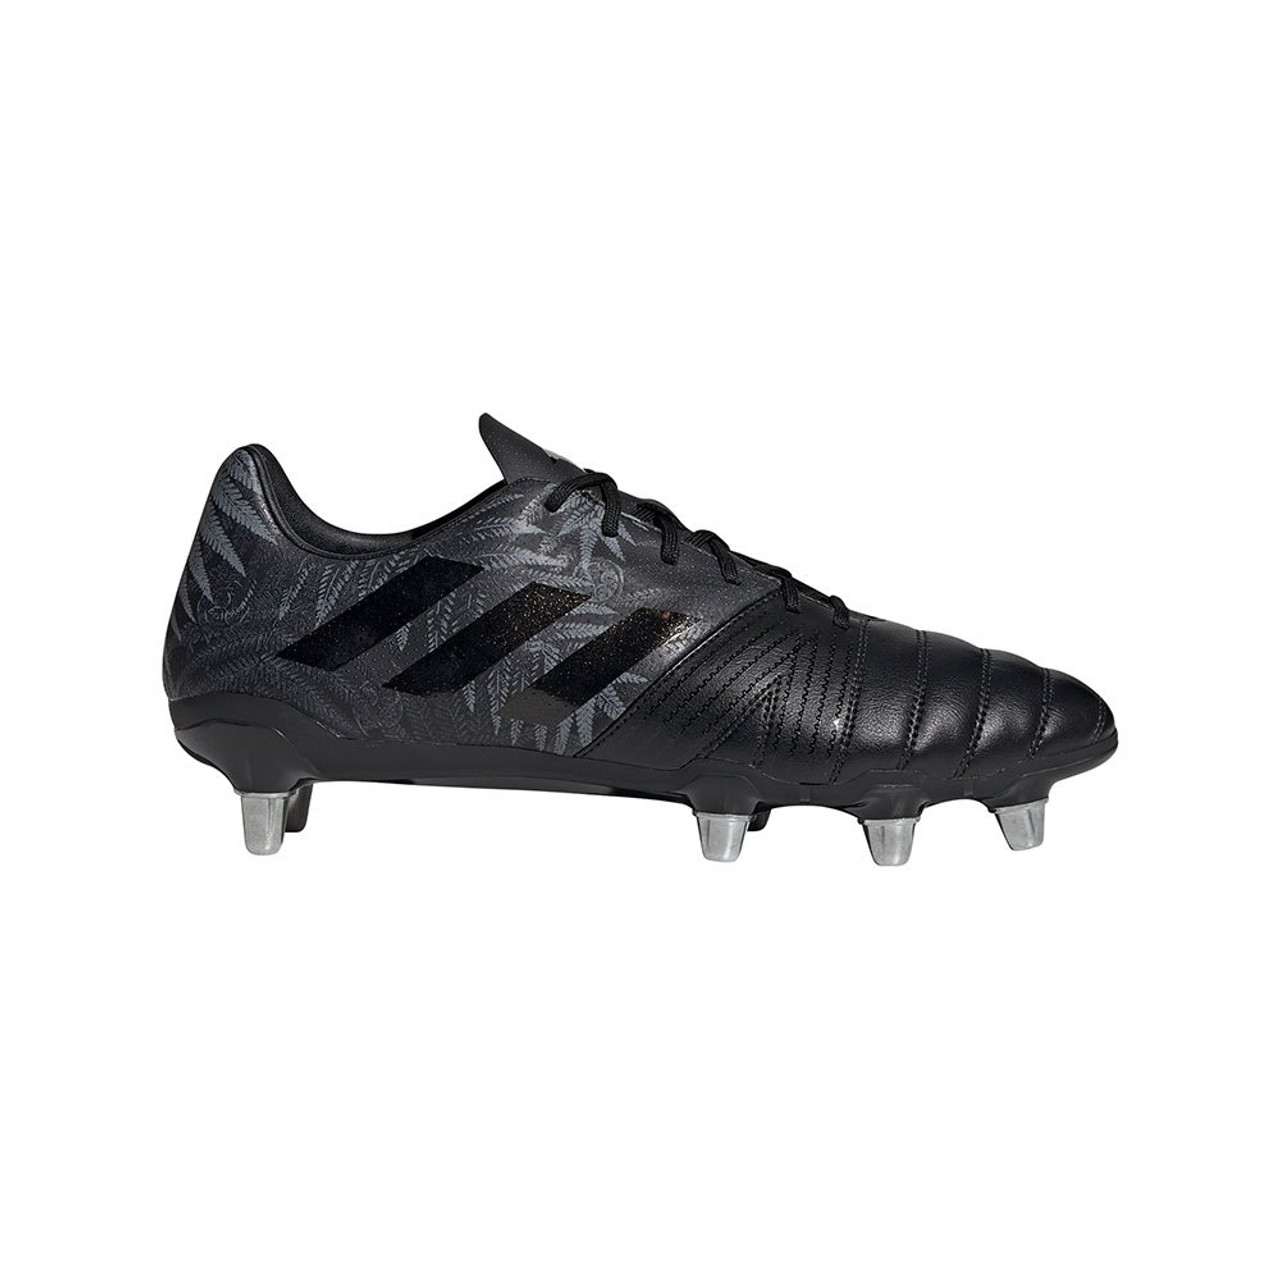 Adidas All Blacks Kakari SG Rugby Boots - Black on sale at Rugby City |  74.99